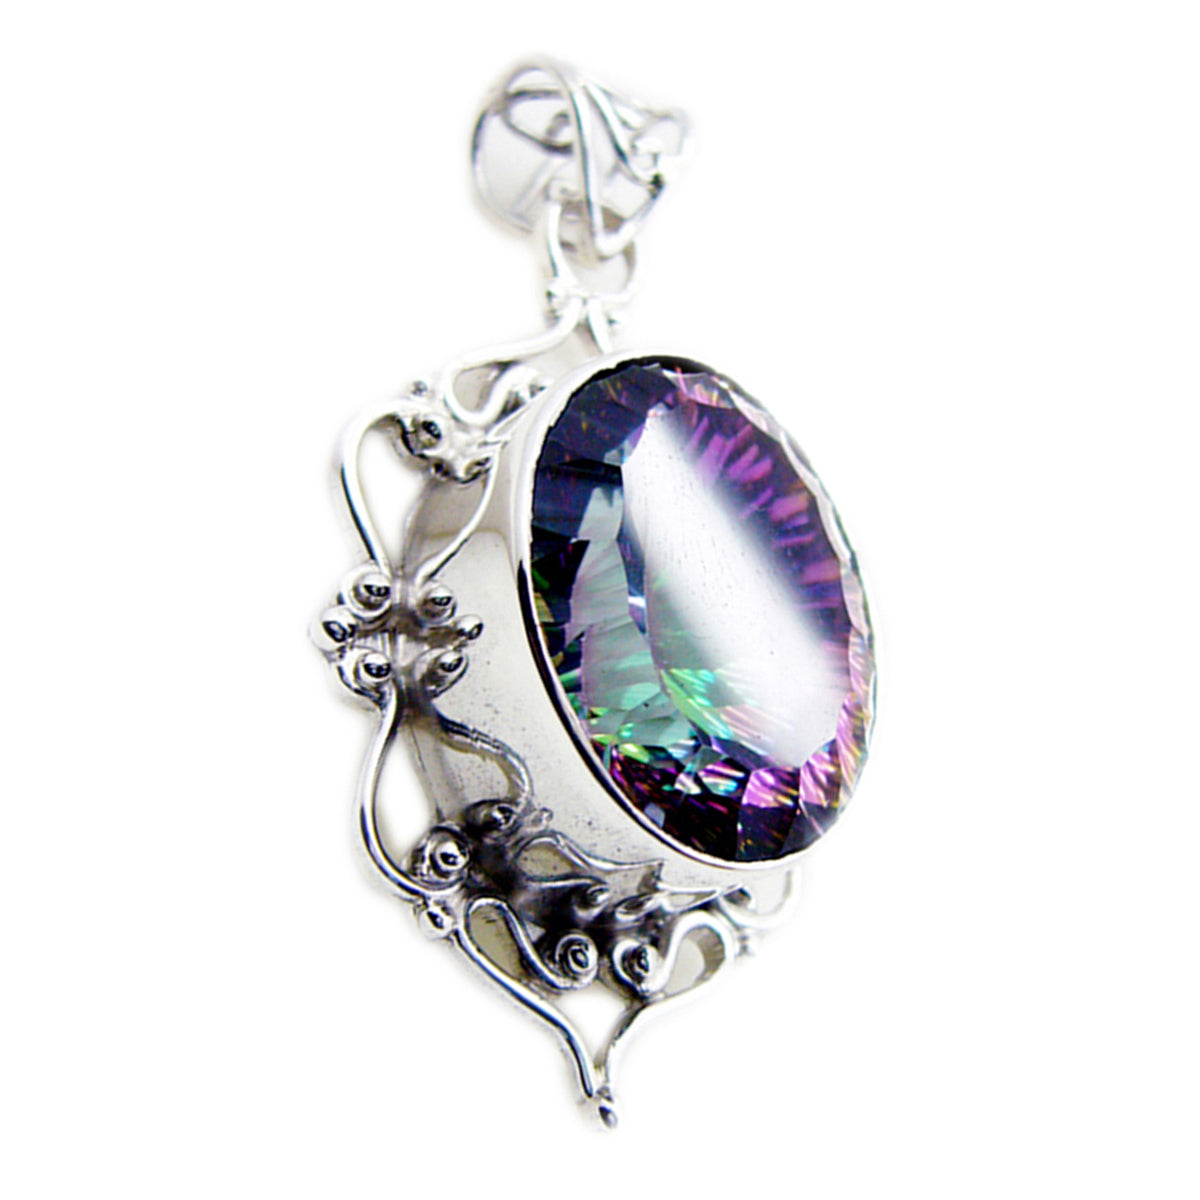 Riyo Tasty Gems Oval Faceted Multi Color Mystic Quartz Solid Silver Pendant Gift For Good Friday